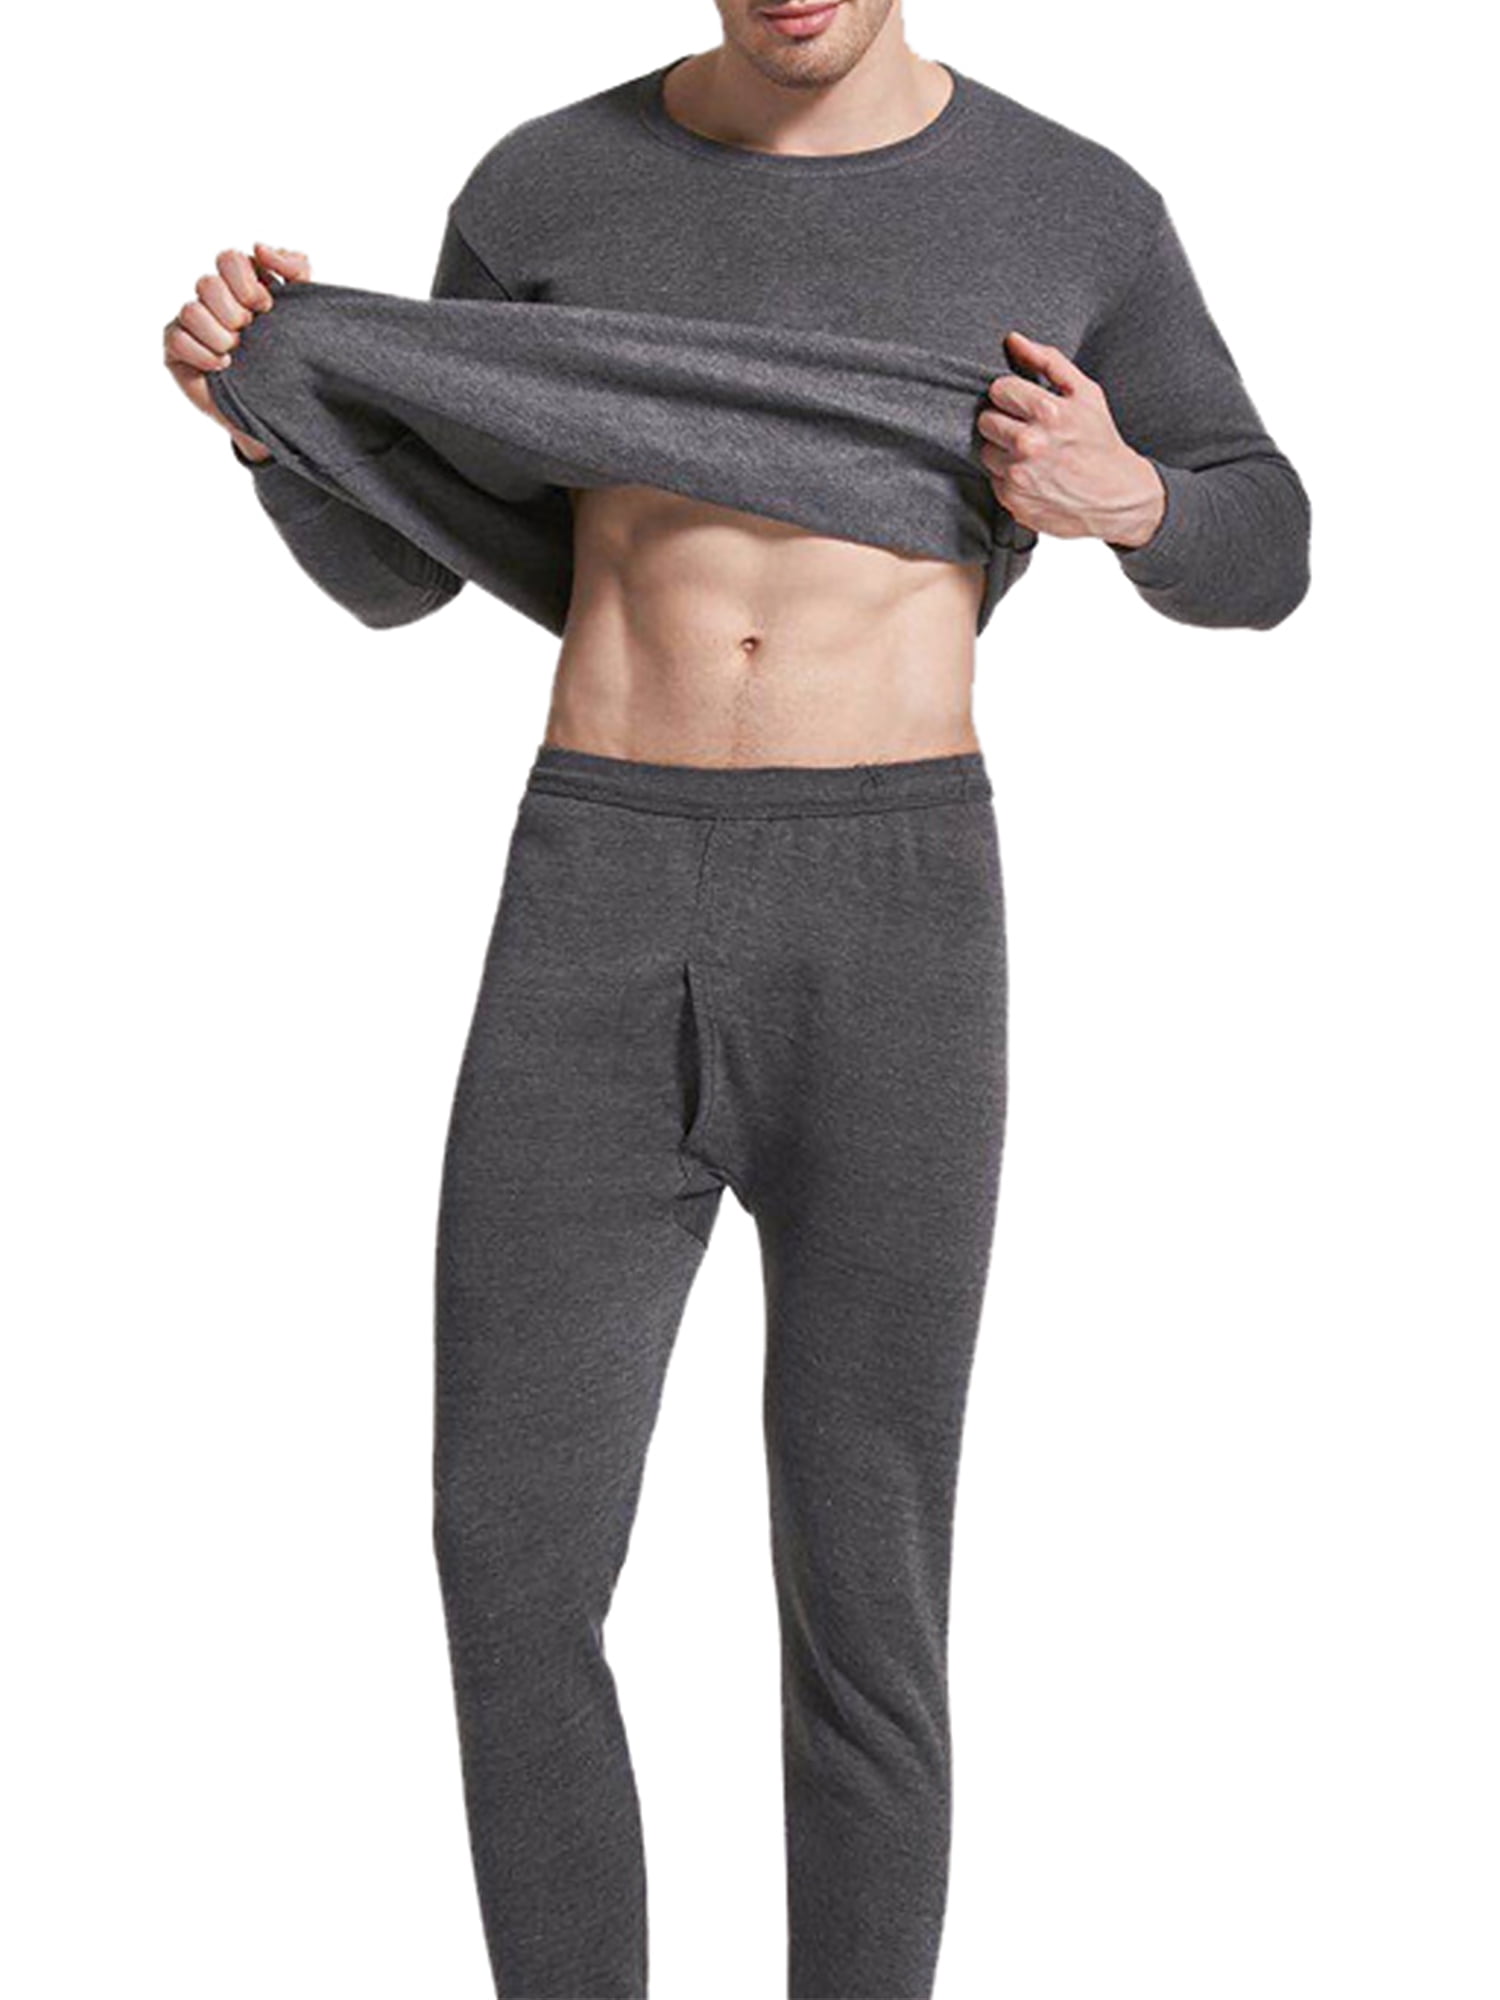 Men Thermal Warm Underwear Set Quick Dry Top Pants Sweat Compression Base Layer 